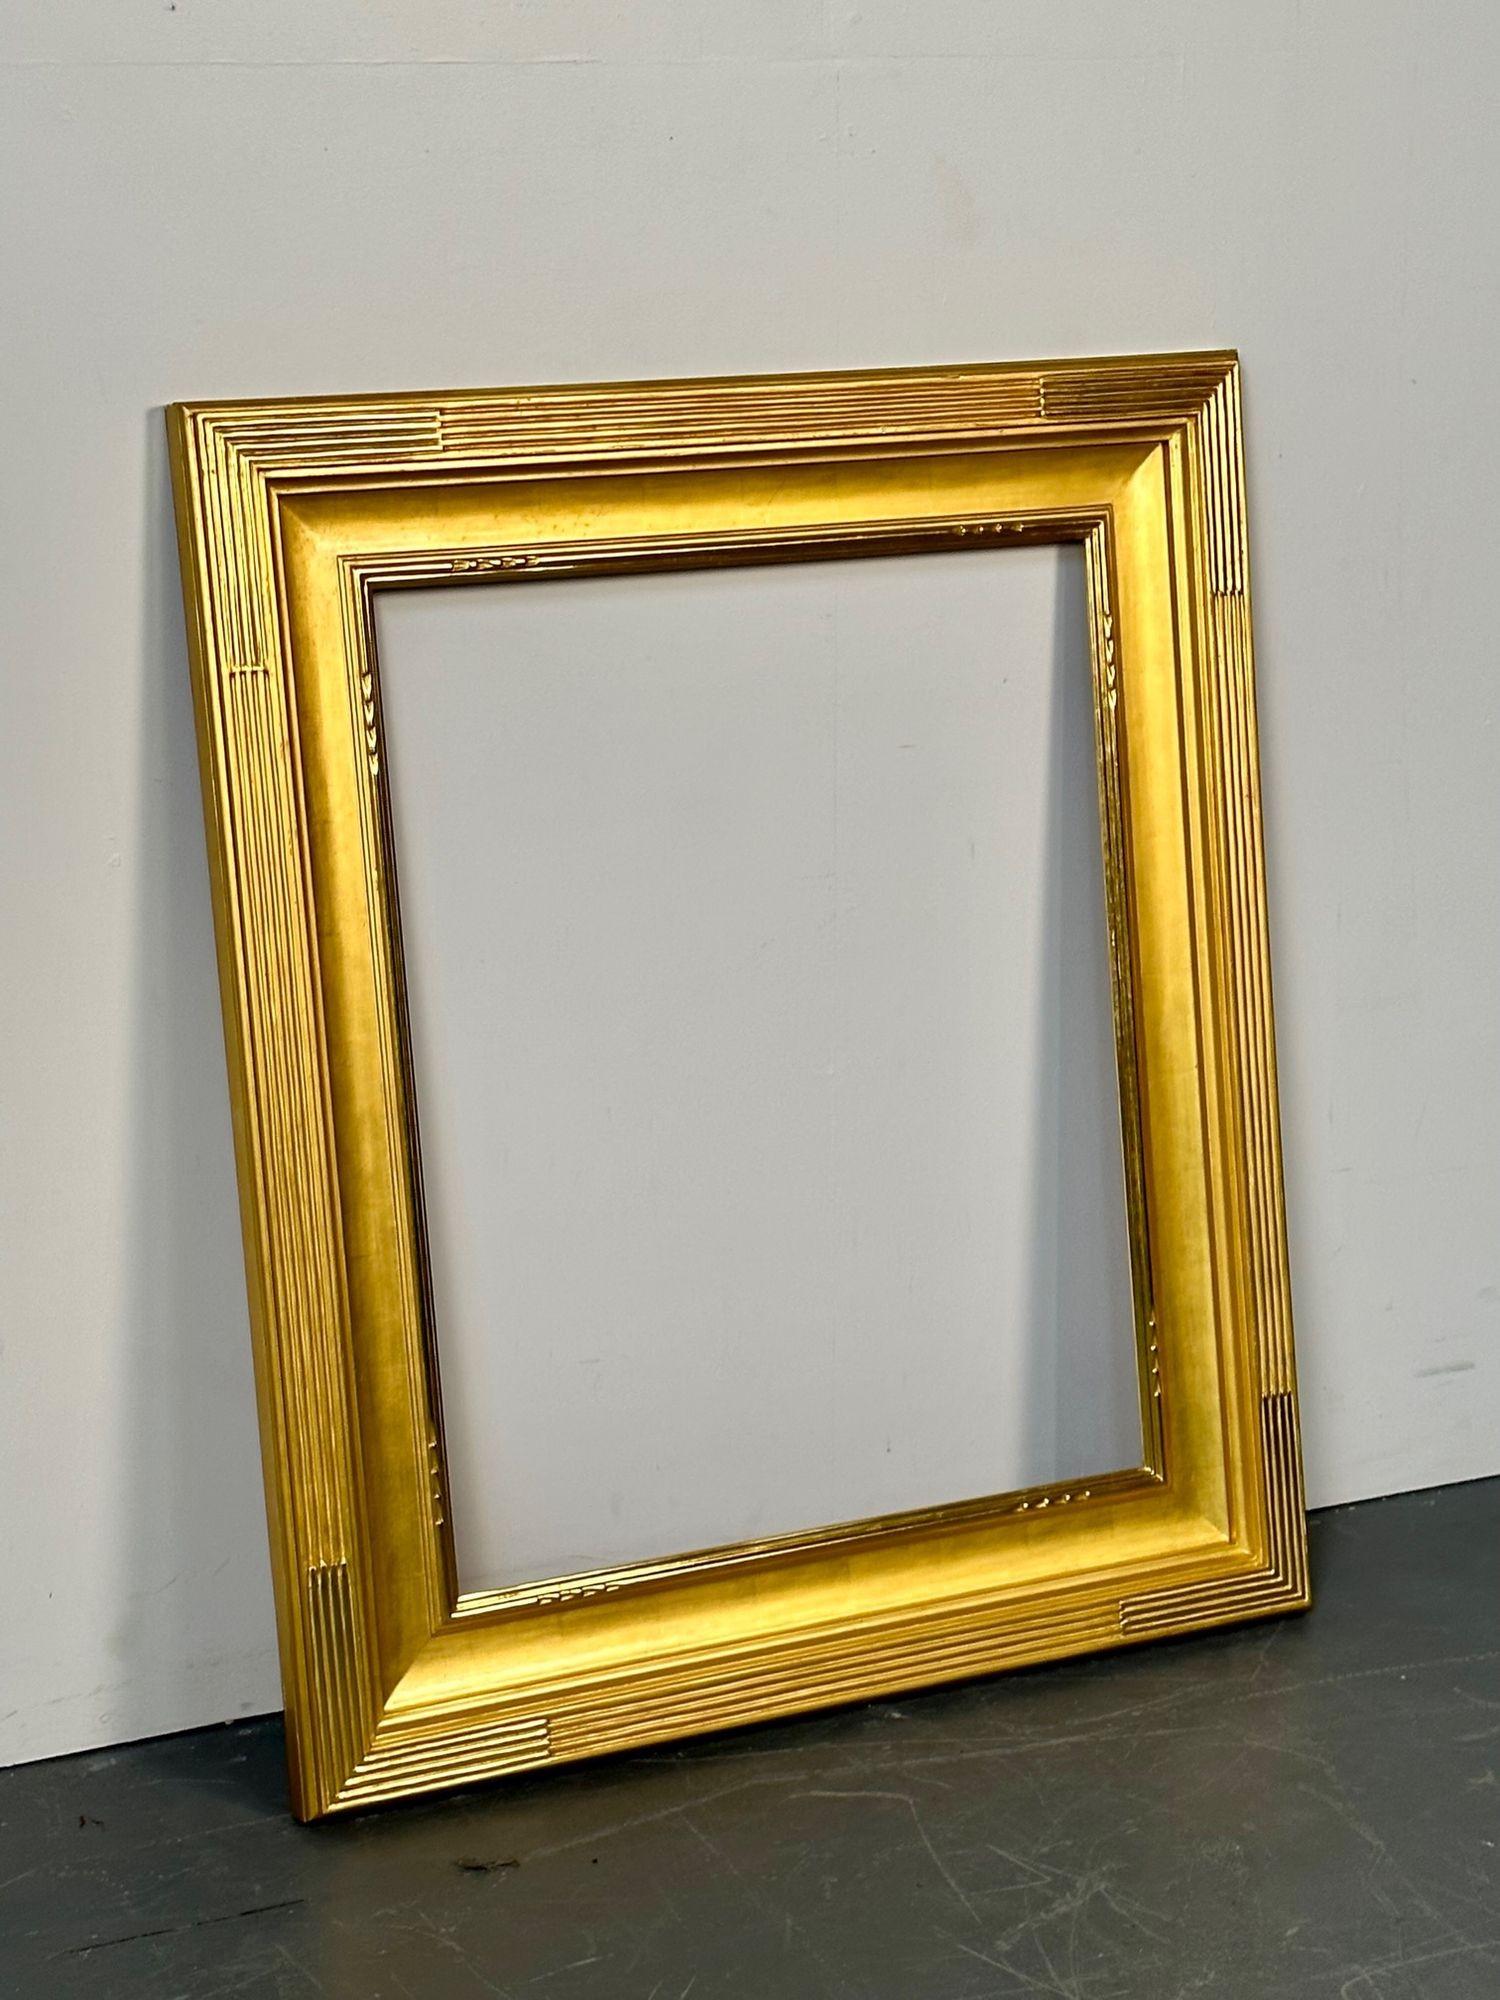 Custom Hollywood Regency Style Carved Giltwood Mirror / Painting Frame
One of a small group of Finely Gilt wood Frames for paintings or mirrors. 
 
Exterior:  40H x 34W x 1.75D  Aperture:  29.25 x 23.25